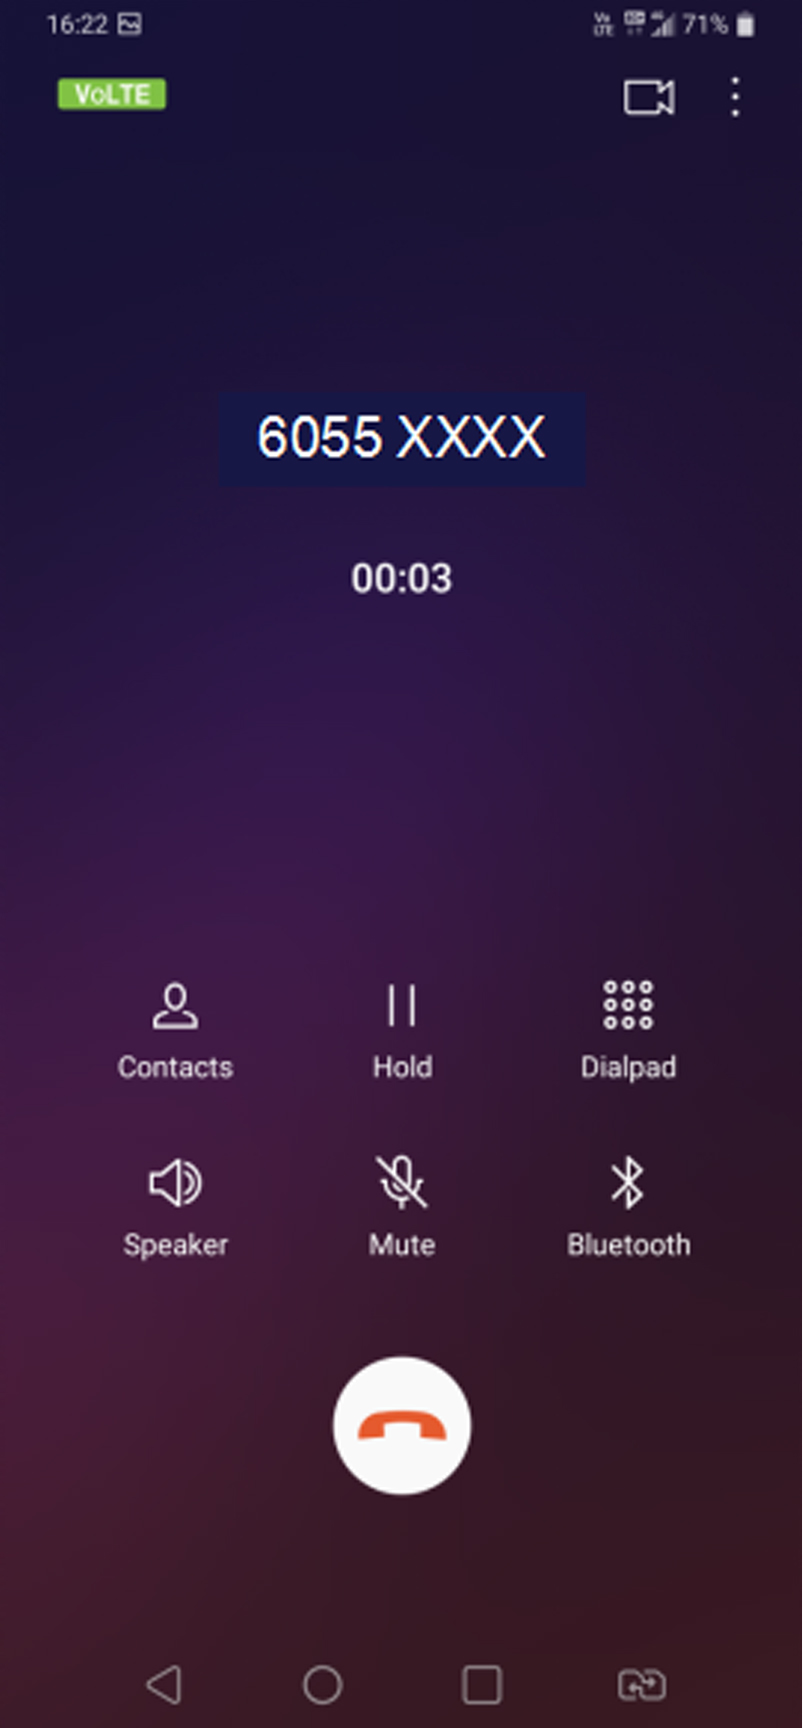 If both users are enjoying VoLTE, the call connection just need as fast as 1 second!